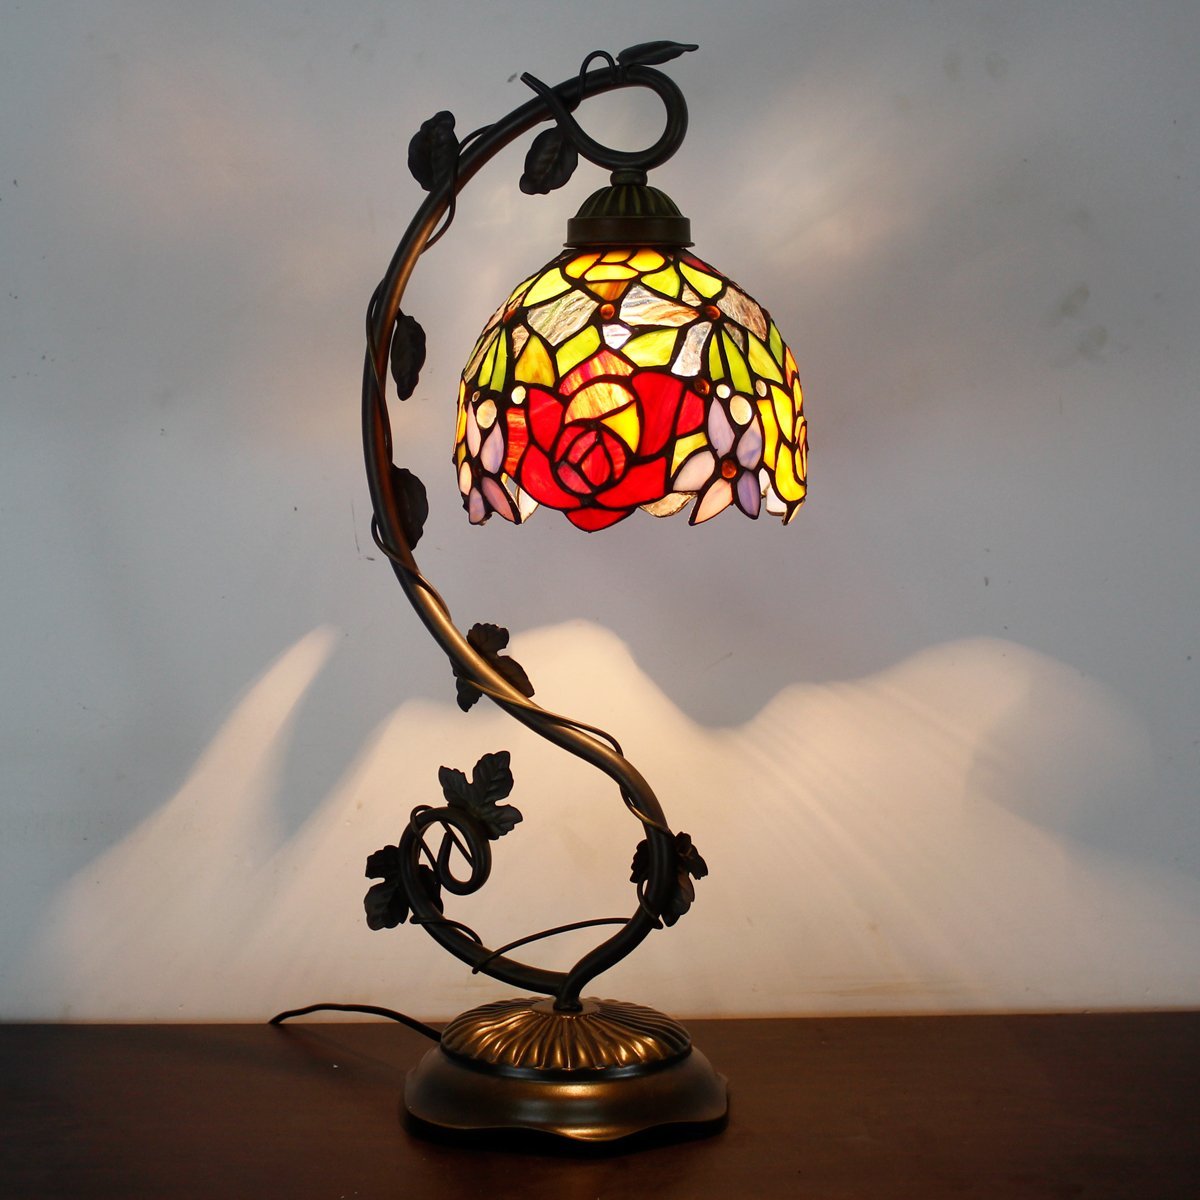 Werfactory® Tiffany Table Lamp 6 Inch